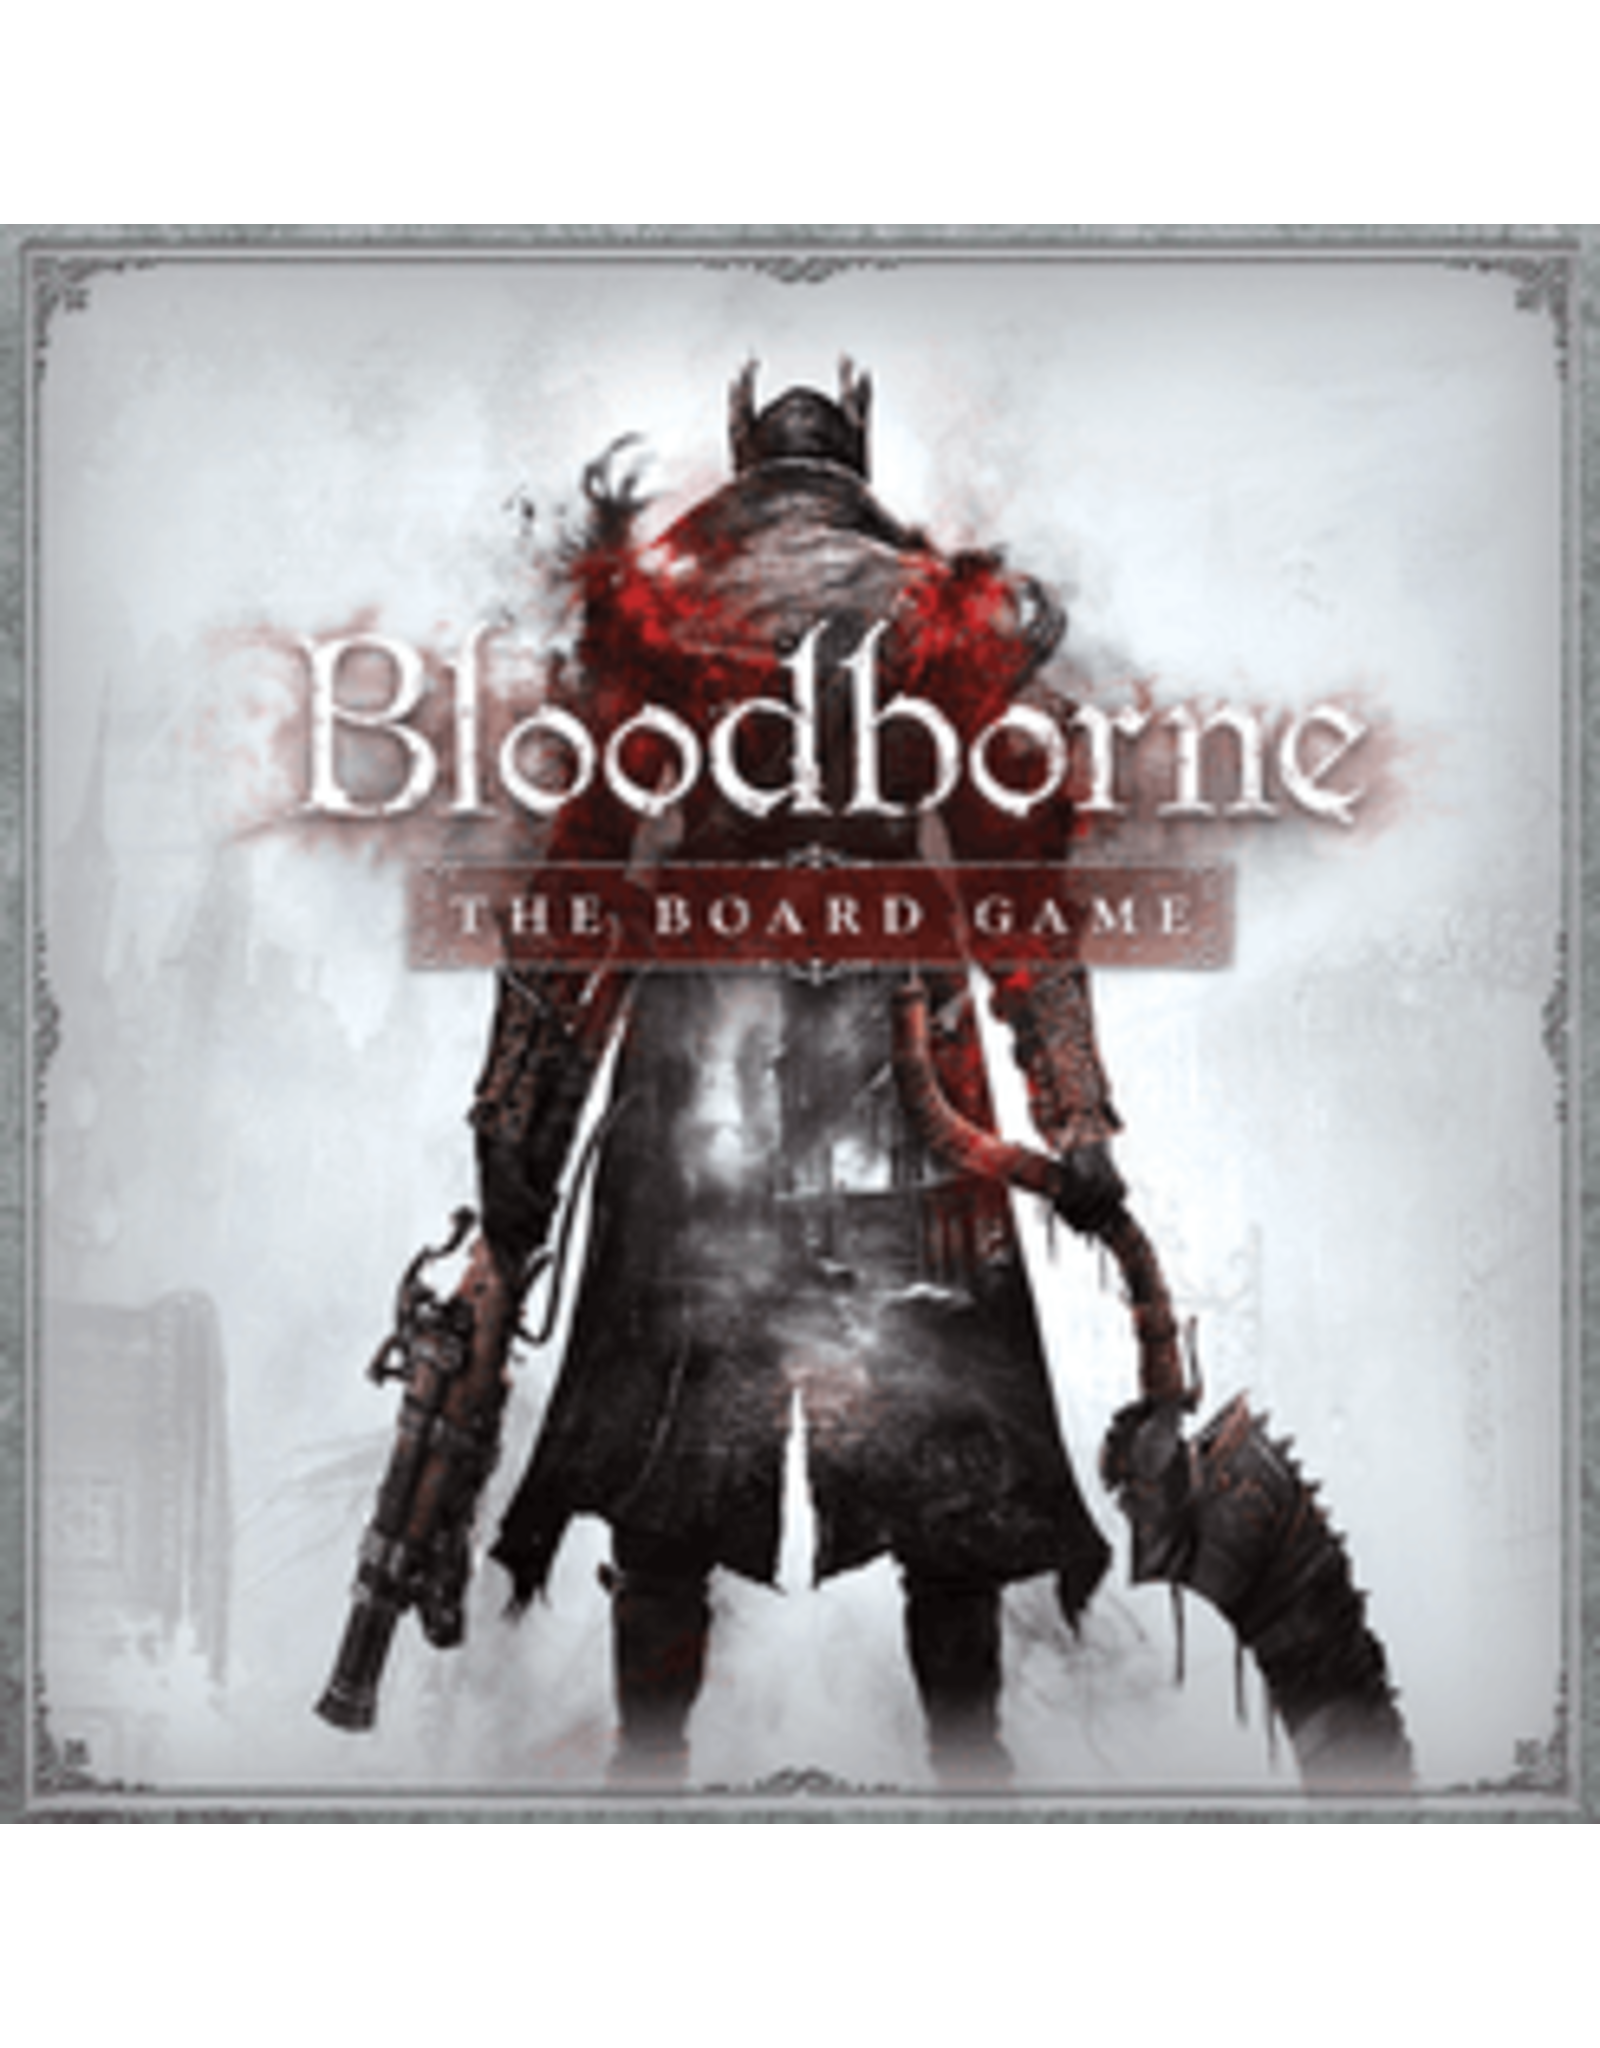 Cool Mini or Not Bloodborne: The Board Game